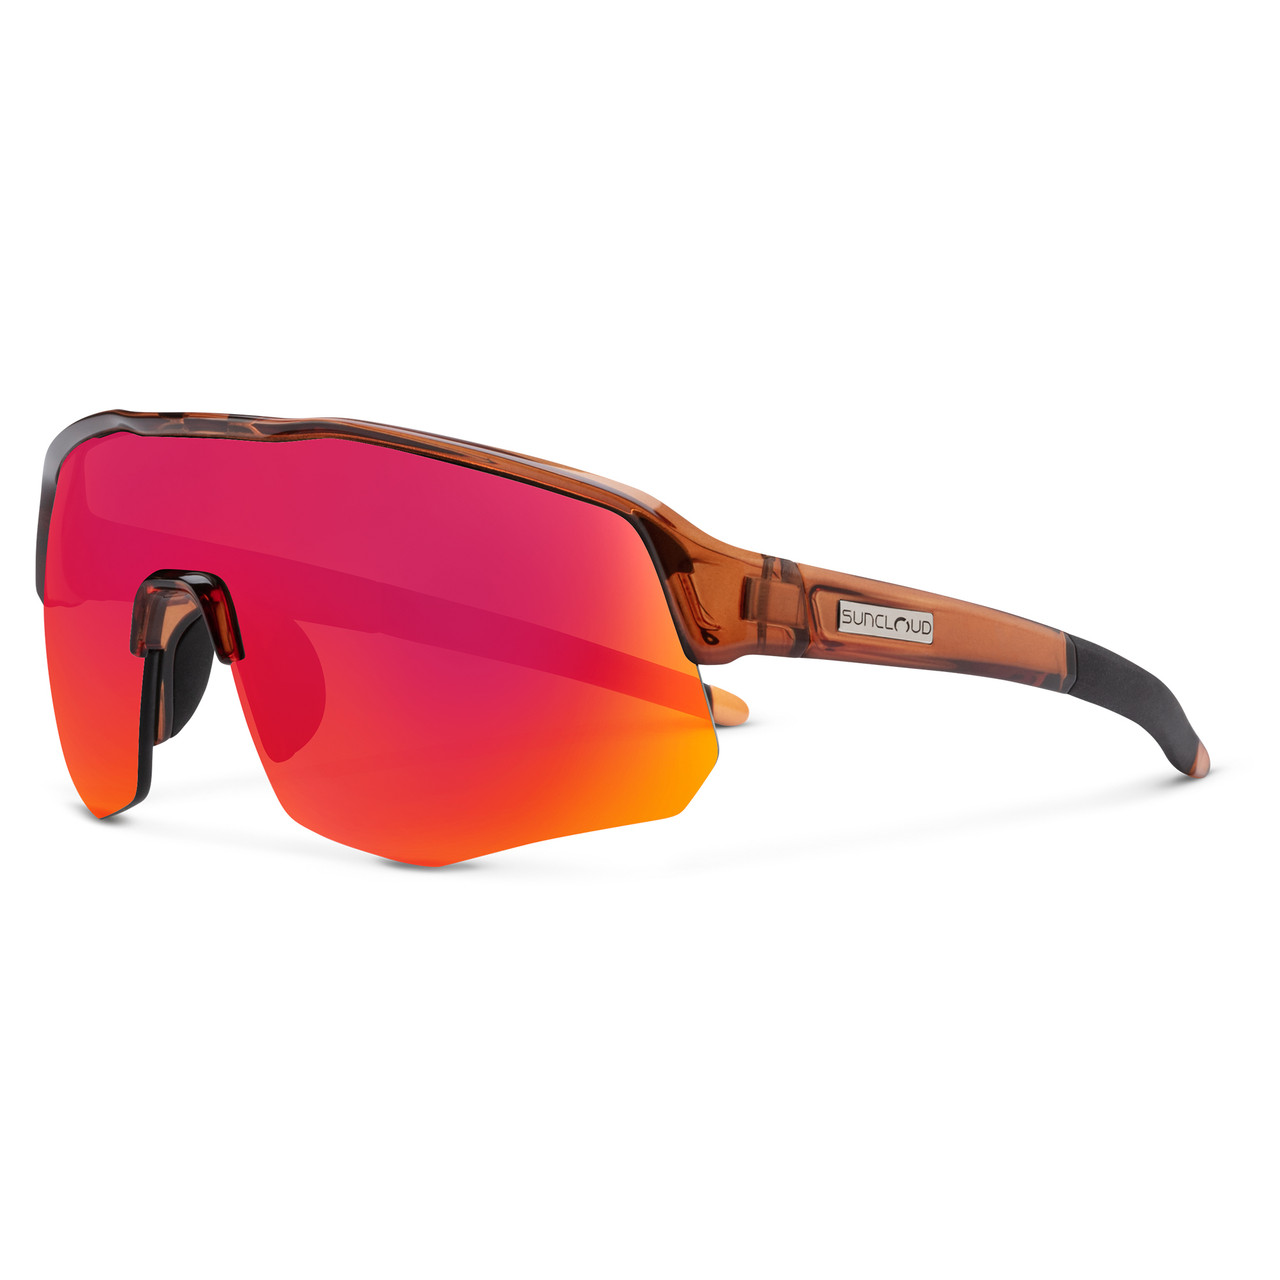 Profile View of Suncloud Cadence Pit Viper Style Semi-Rimless Sport Shield Sunglasses in Matte Crystal Amber with Polar Red Mirror